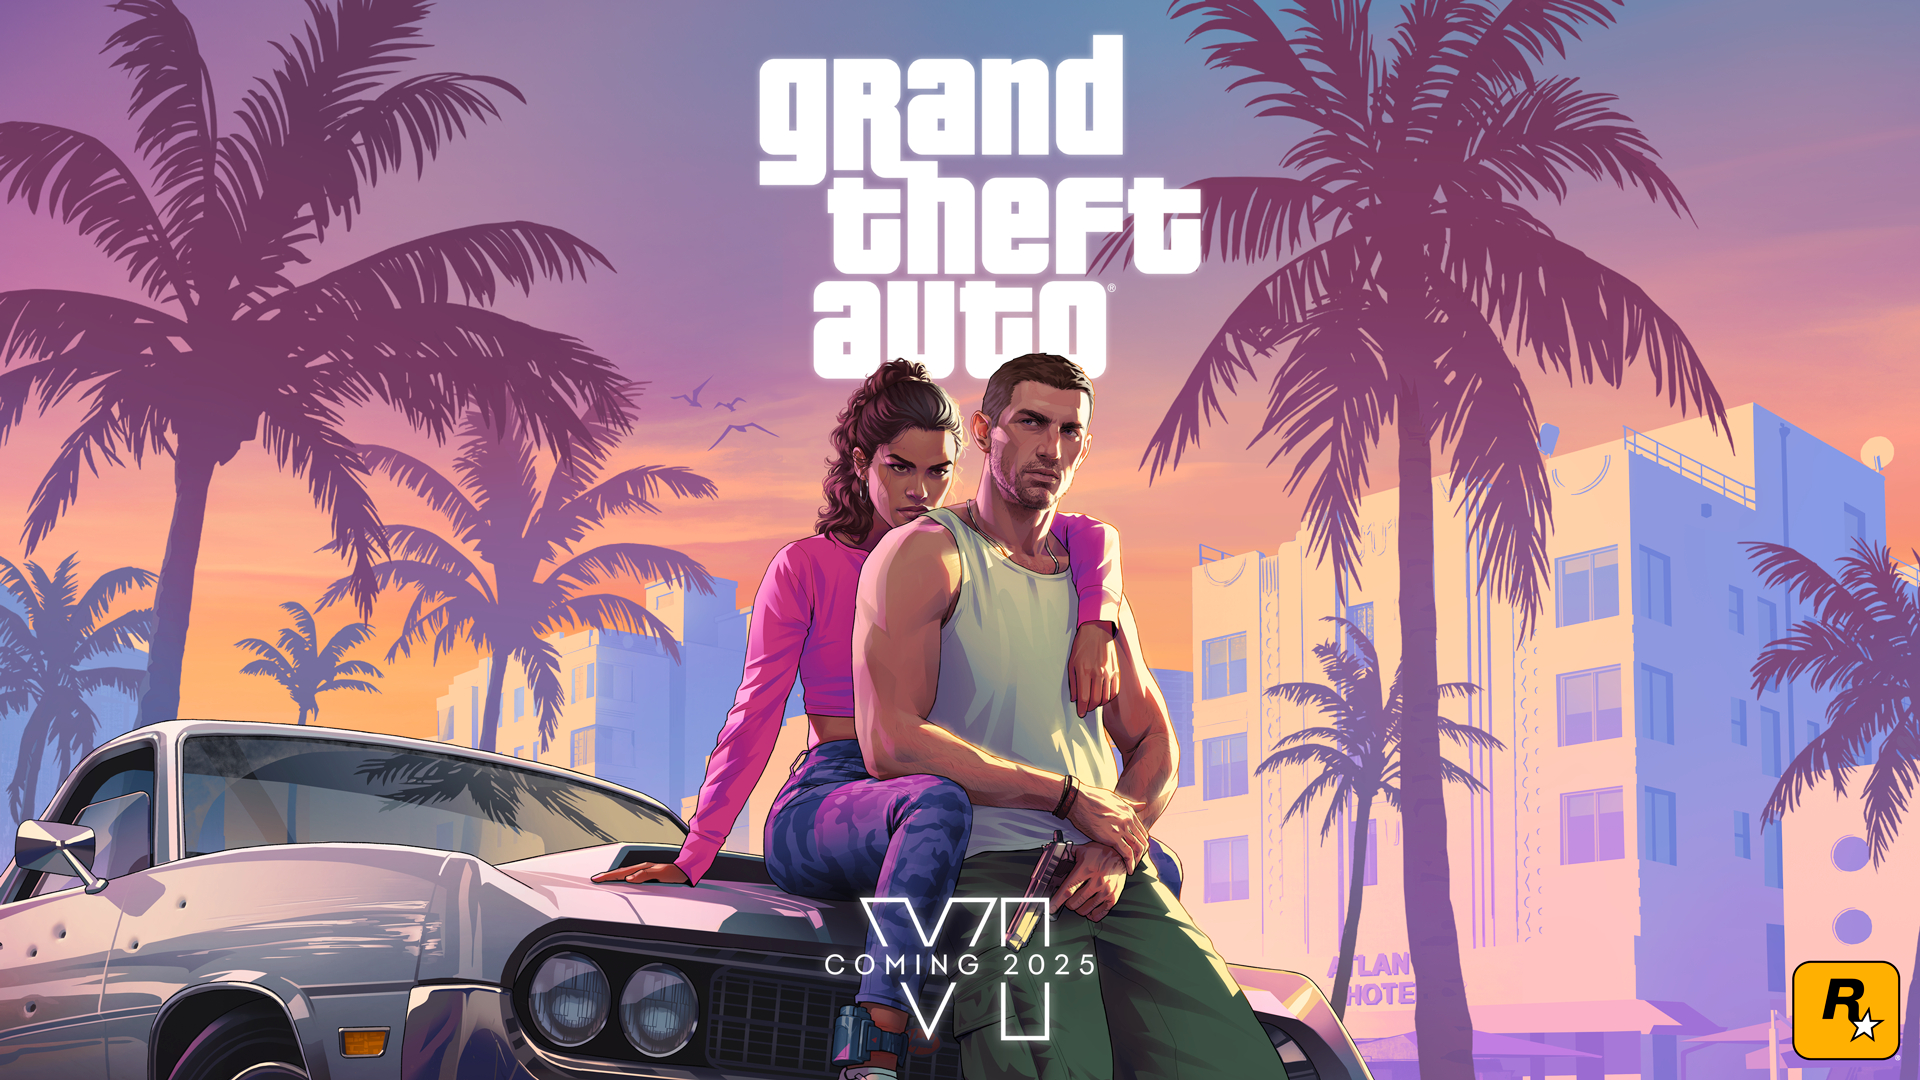 gta 6 trailer: GTA 6: Is the Grand Theft Auto 6 not coming to PC